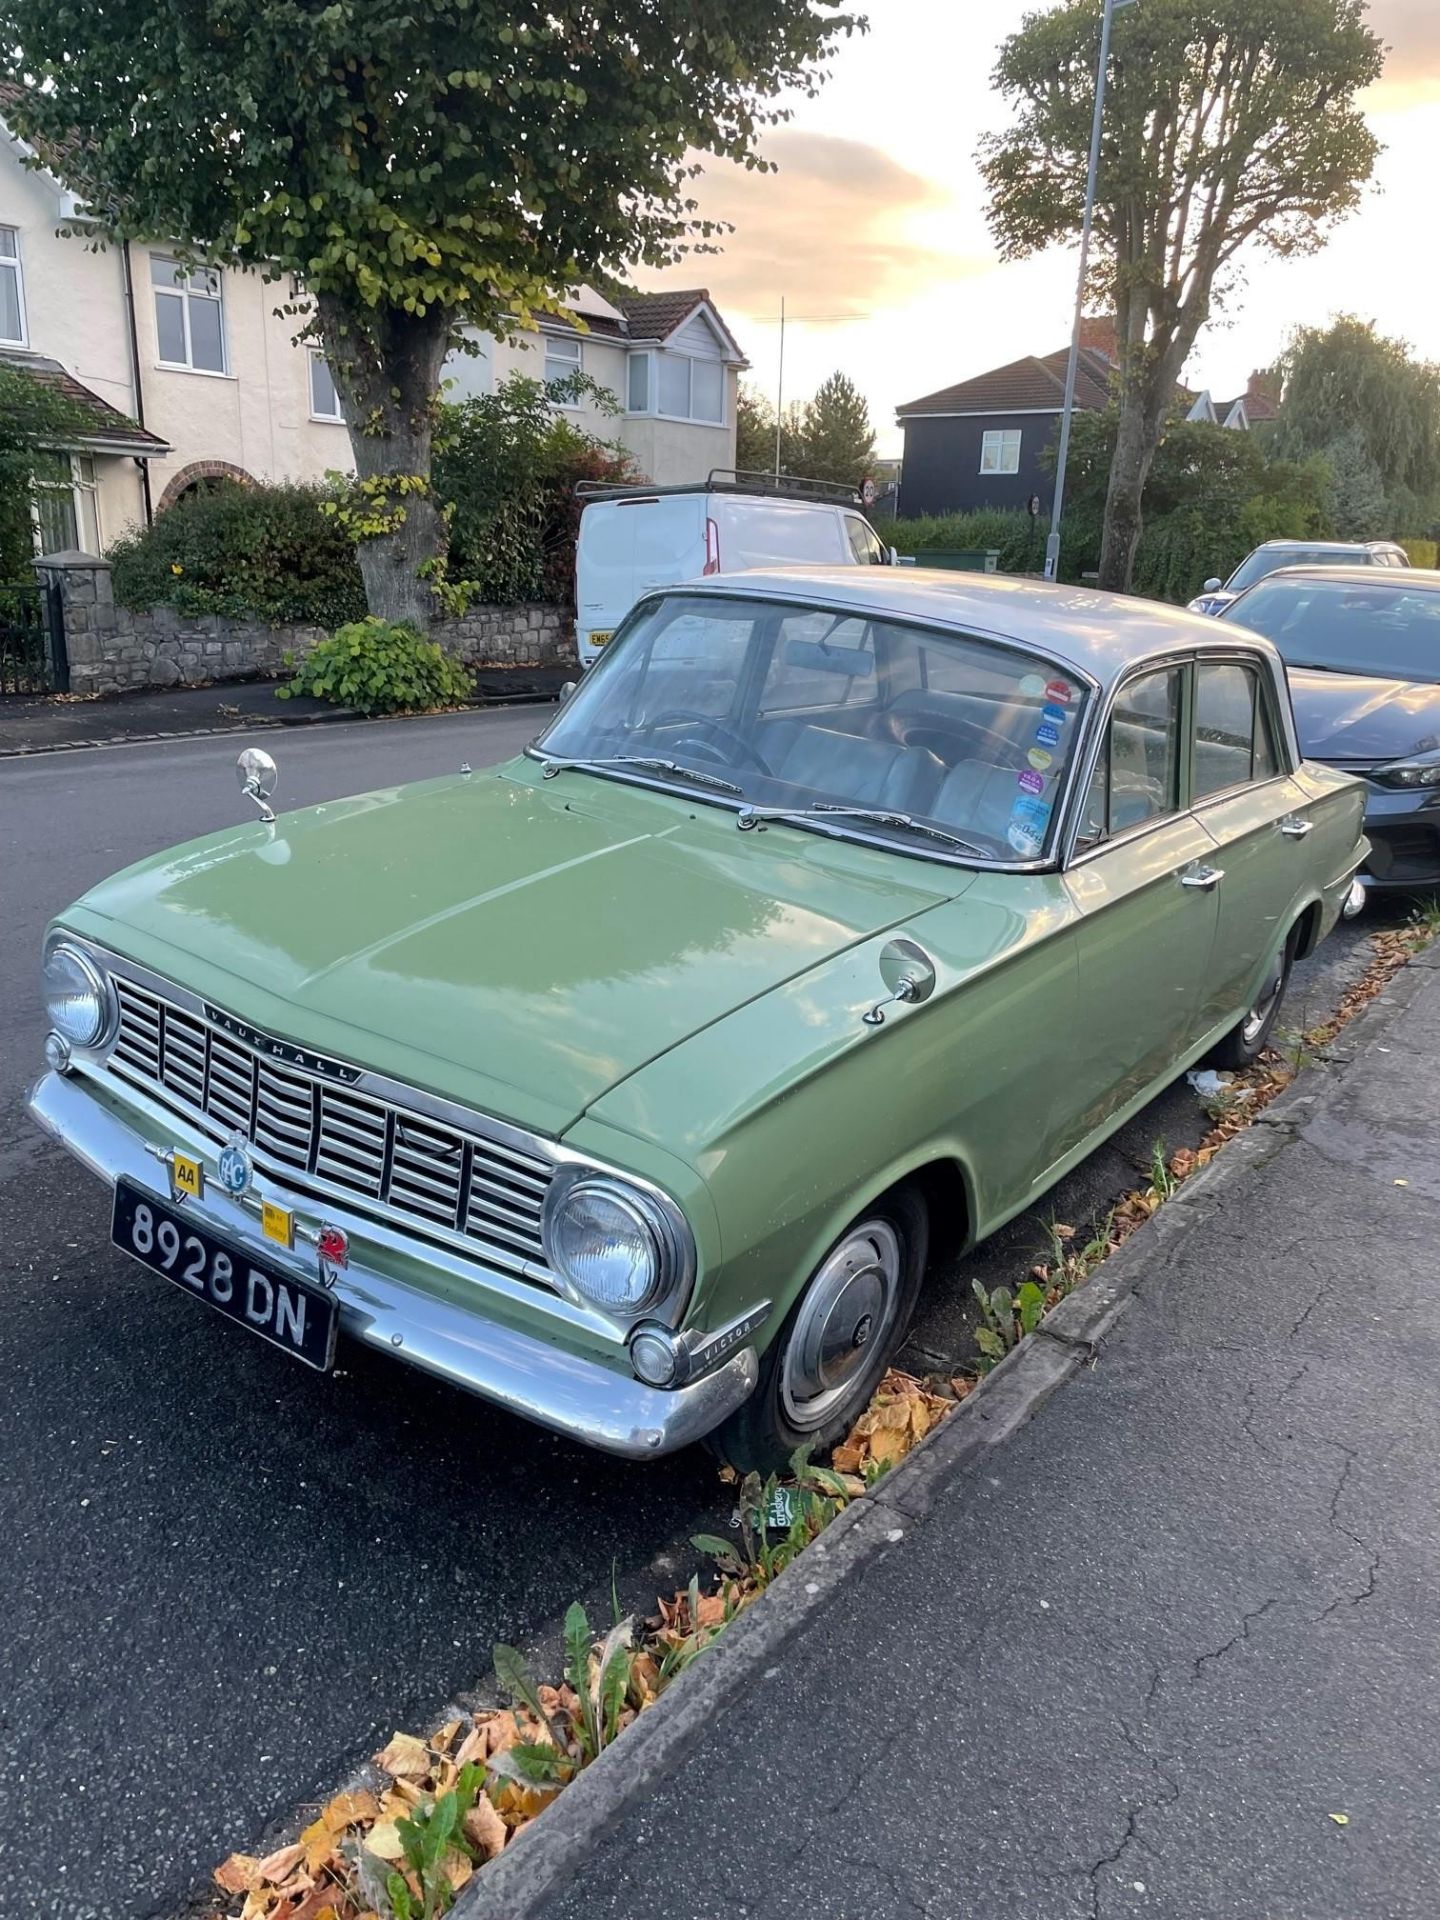 1963 Vauxhall Victor FB30 Registration number 8928 DN Green with grey leather interior Vauxhall - Image 2 of 13